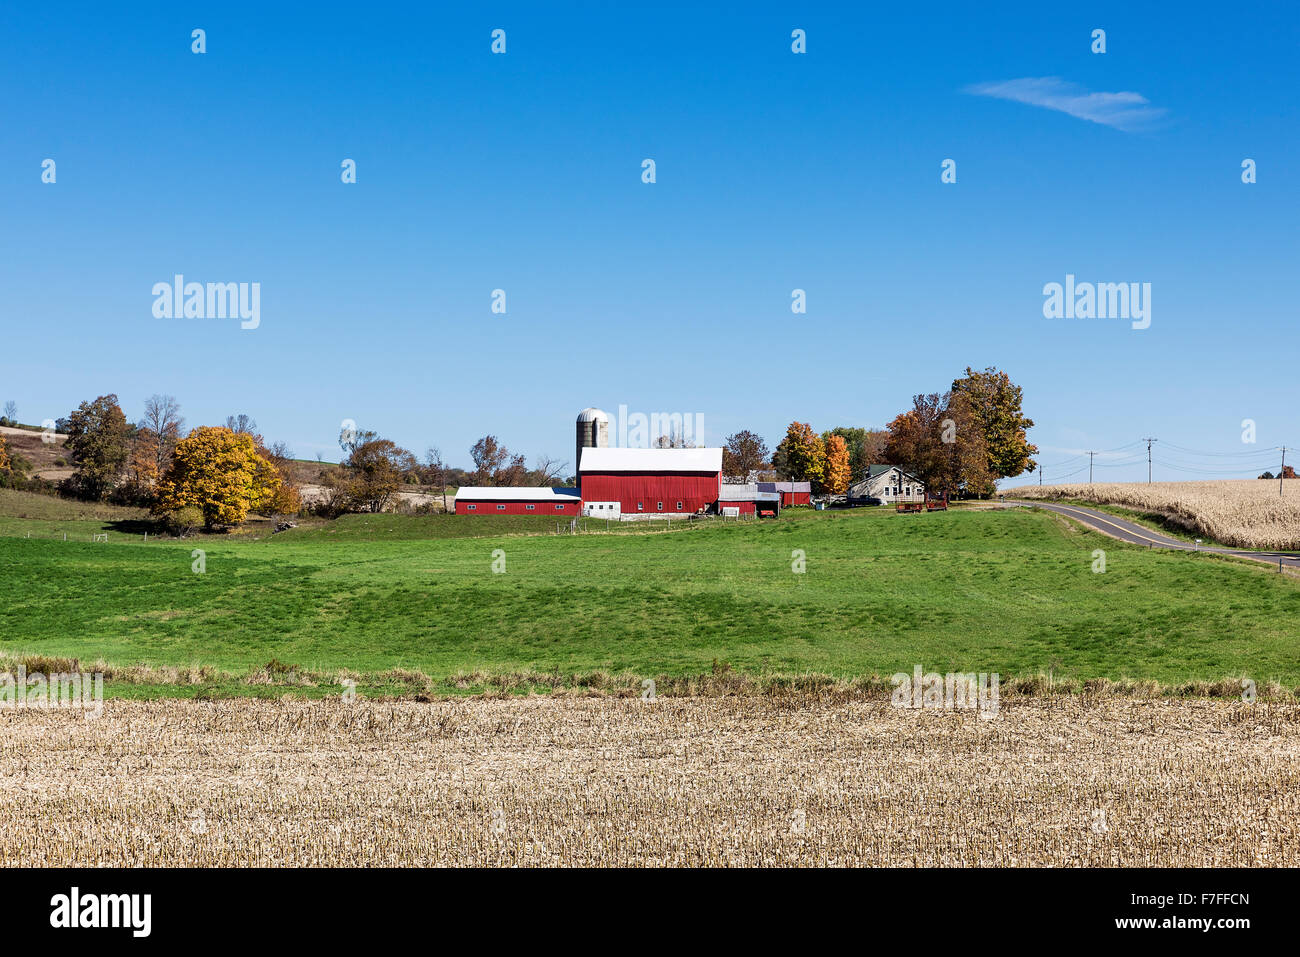 Rustic red barn and corn field, West Winfield, New York, USA Stock Photo